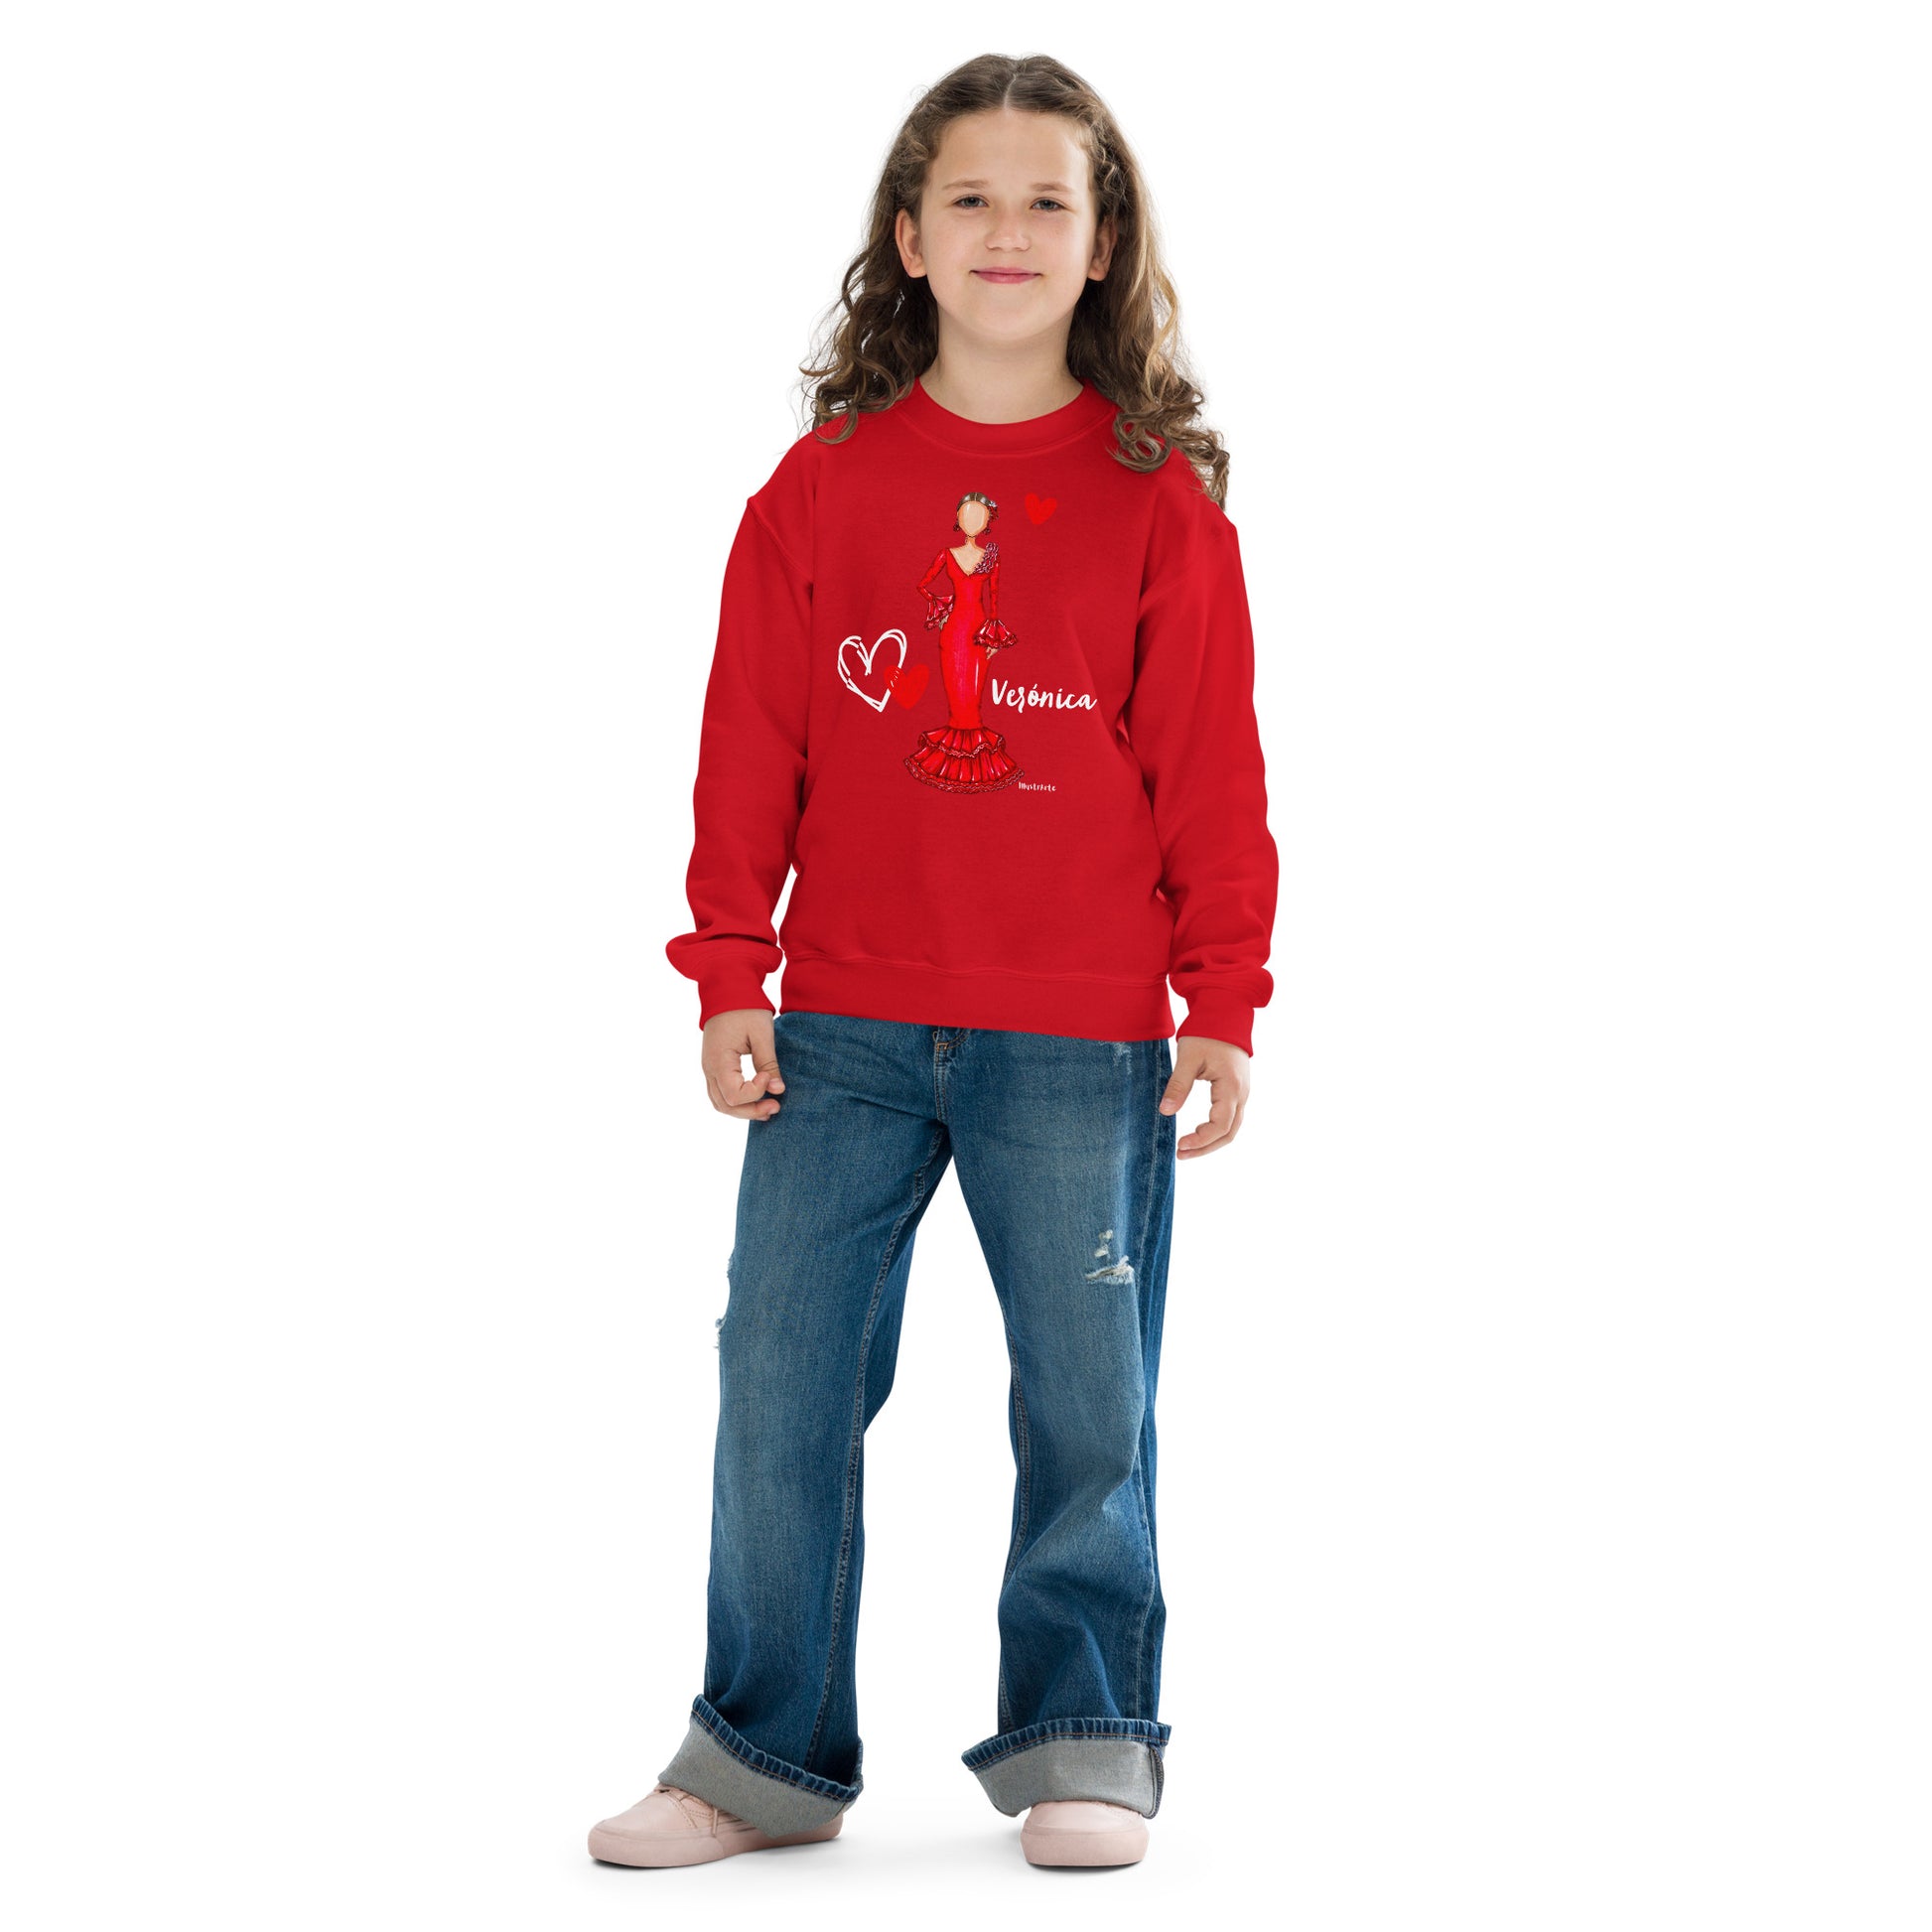 a young girl wearing a red sweatshirt and jeans